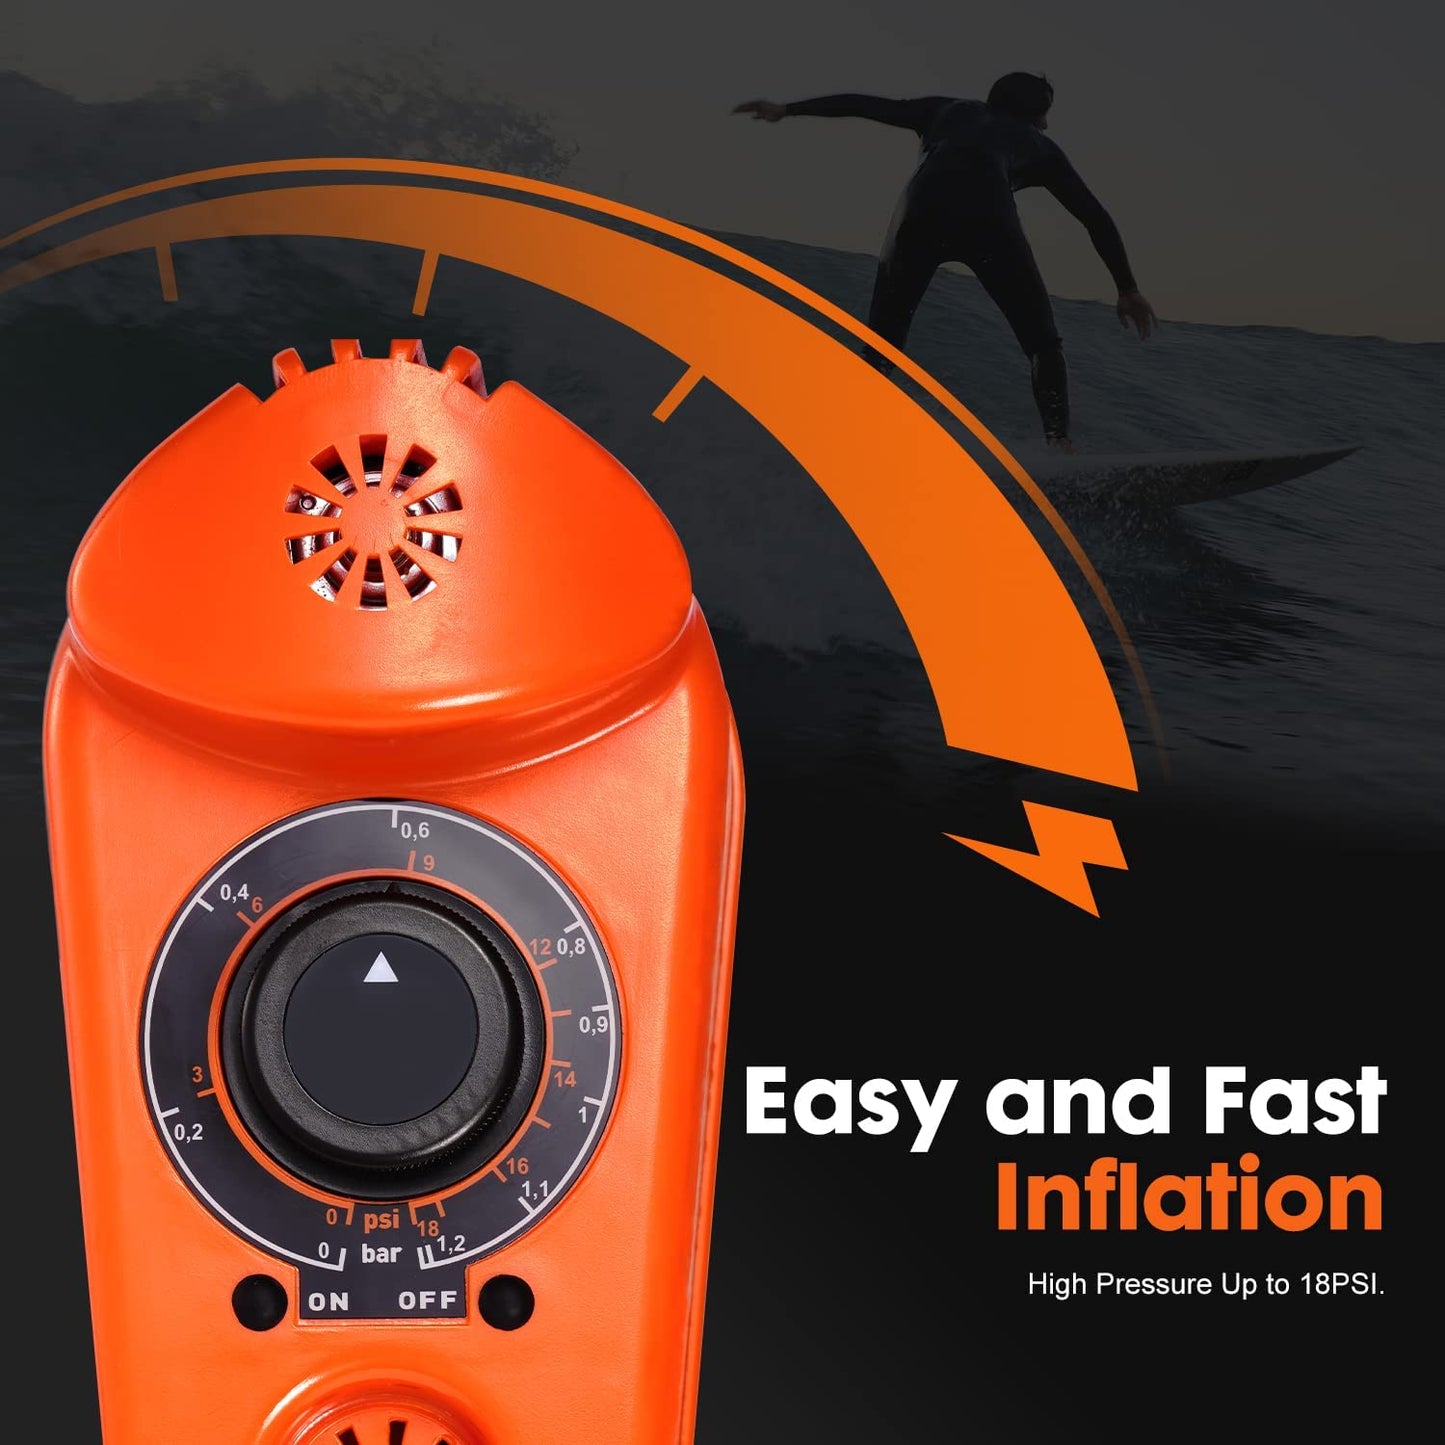 Paddle Board ‎Air Pump - Wasy and Fast Inflation